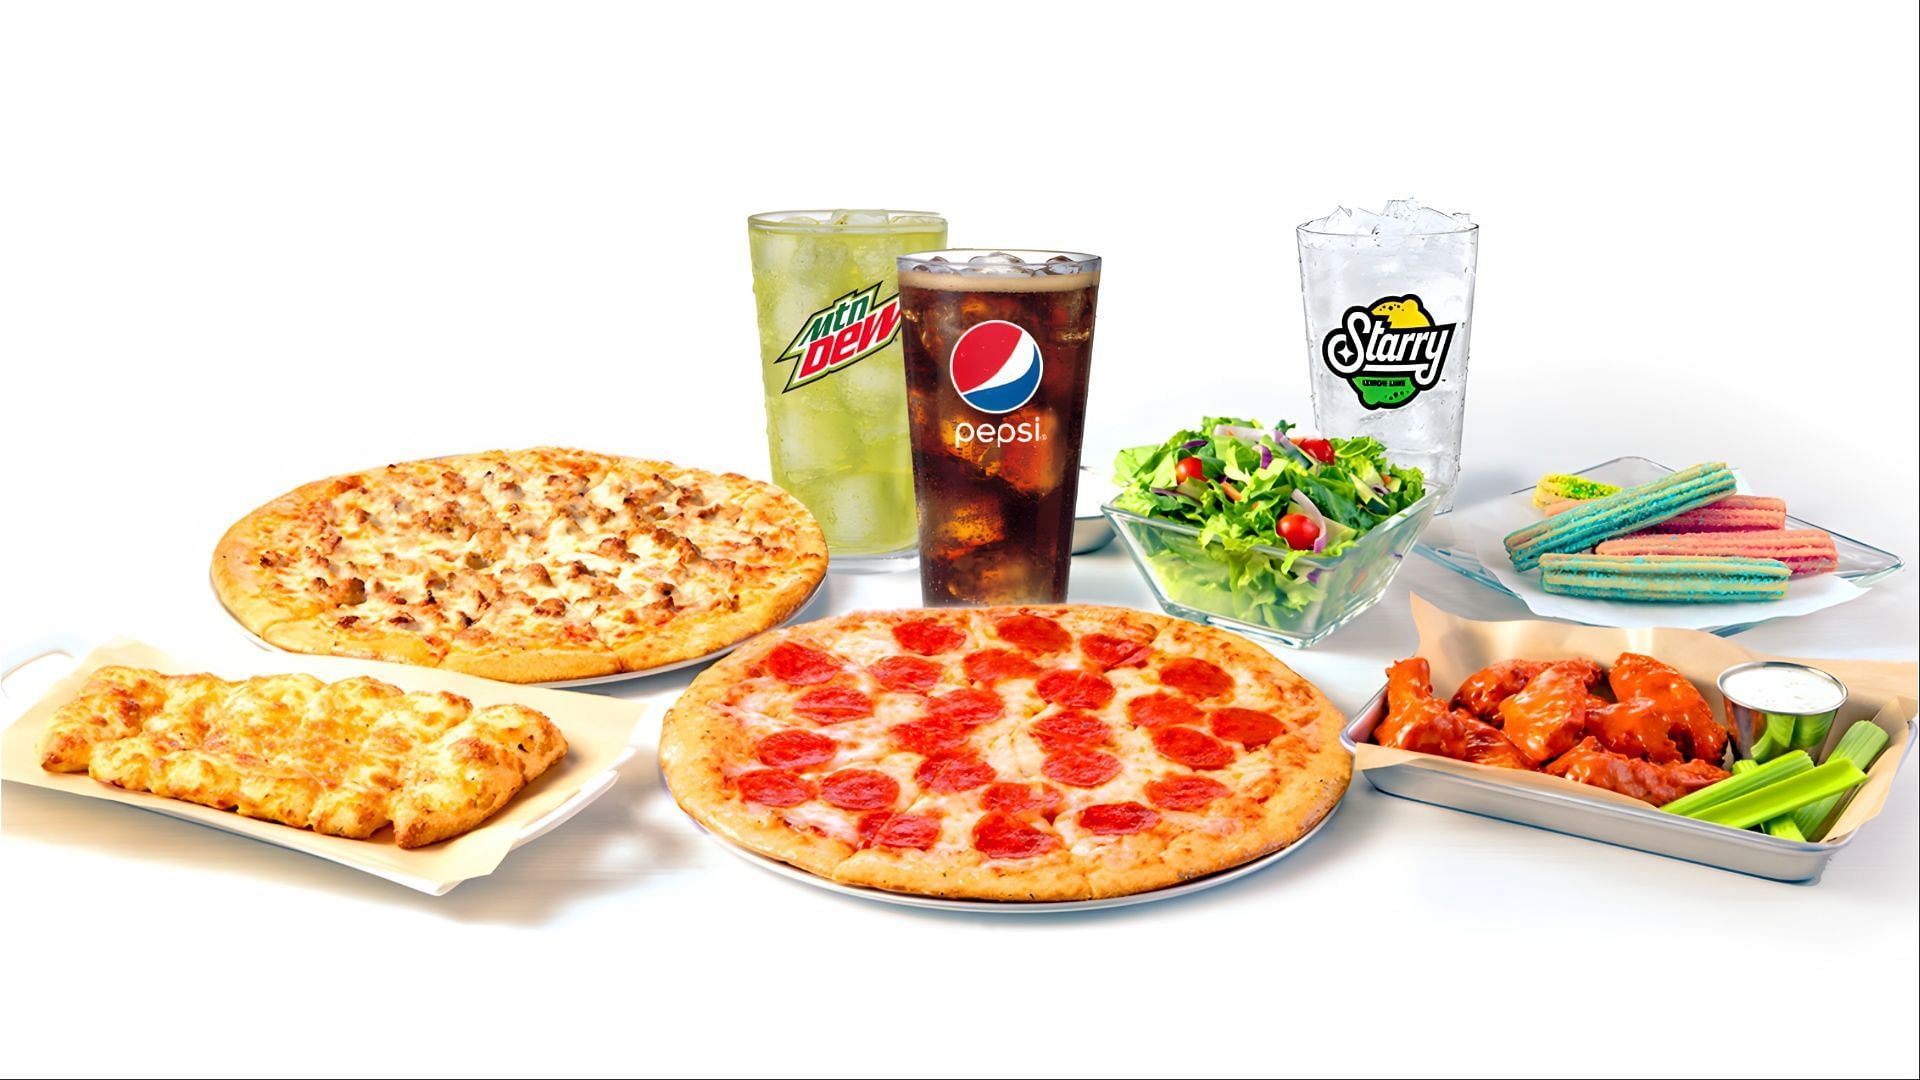 The new Grown-Up menu delivers spicy and savory food options for adults (Image via Chuck E Cheese)